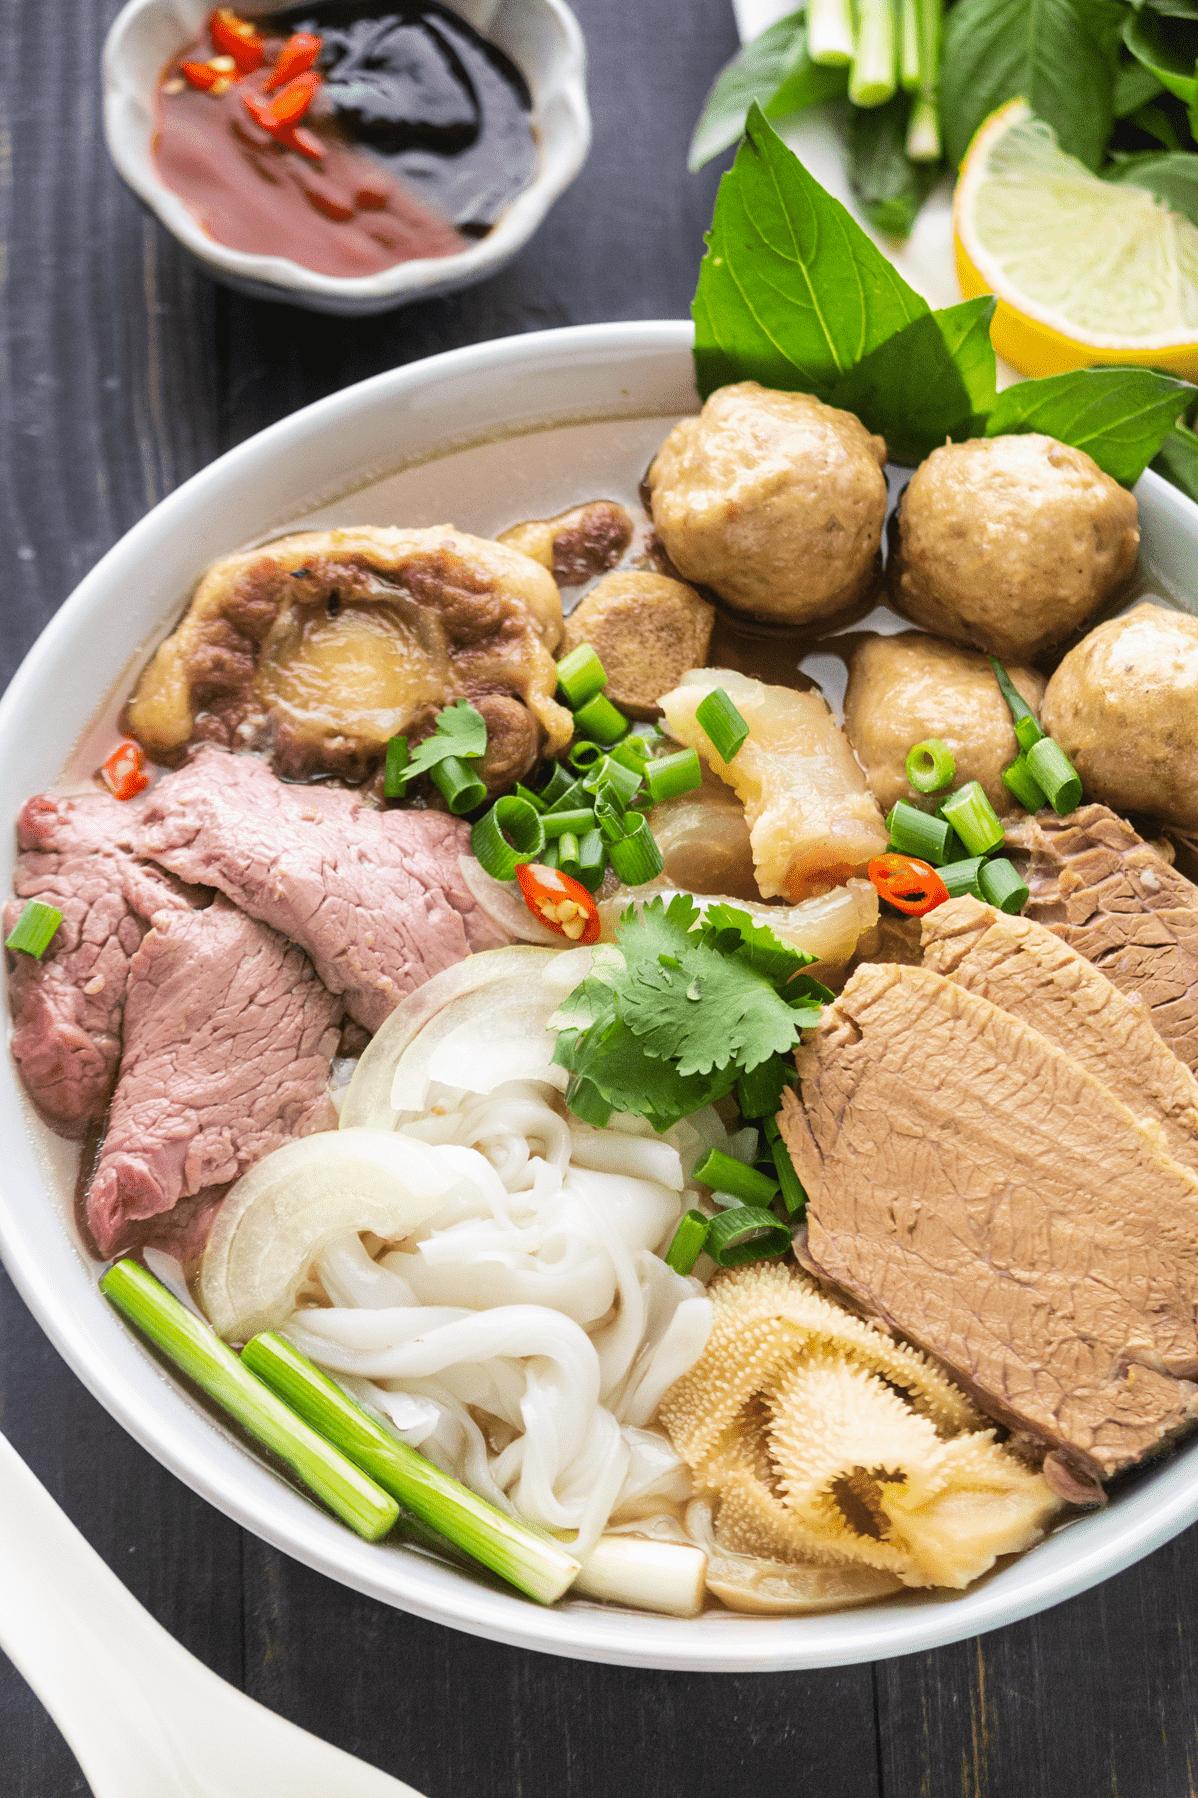  The rice noodles in Pho Bac soak up the flavors of the broth, creating a truly delectable experience.